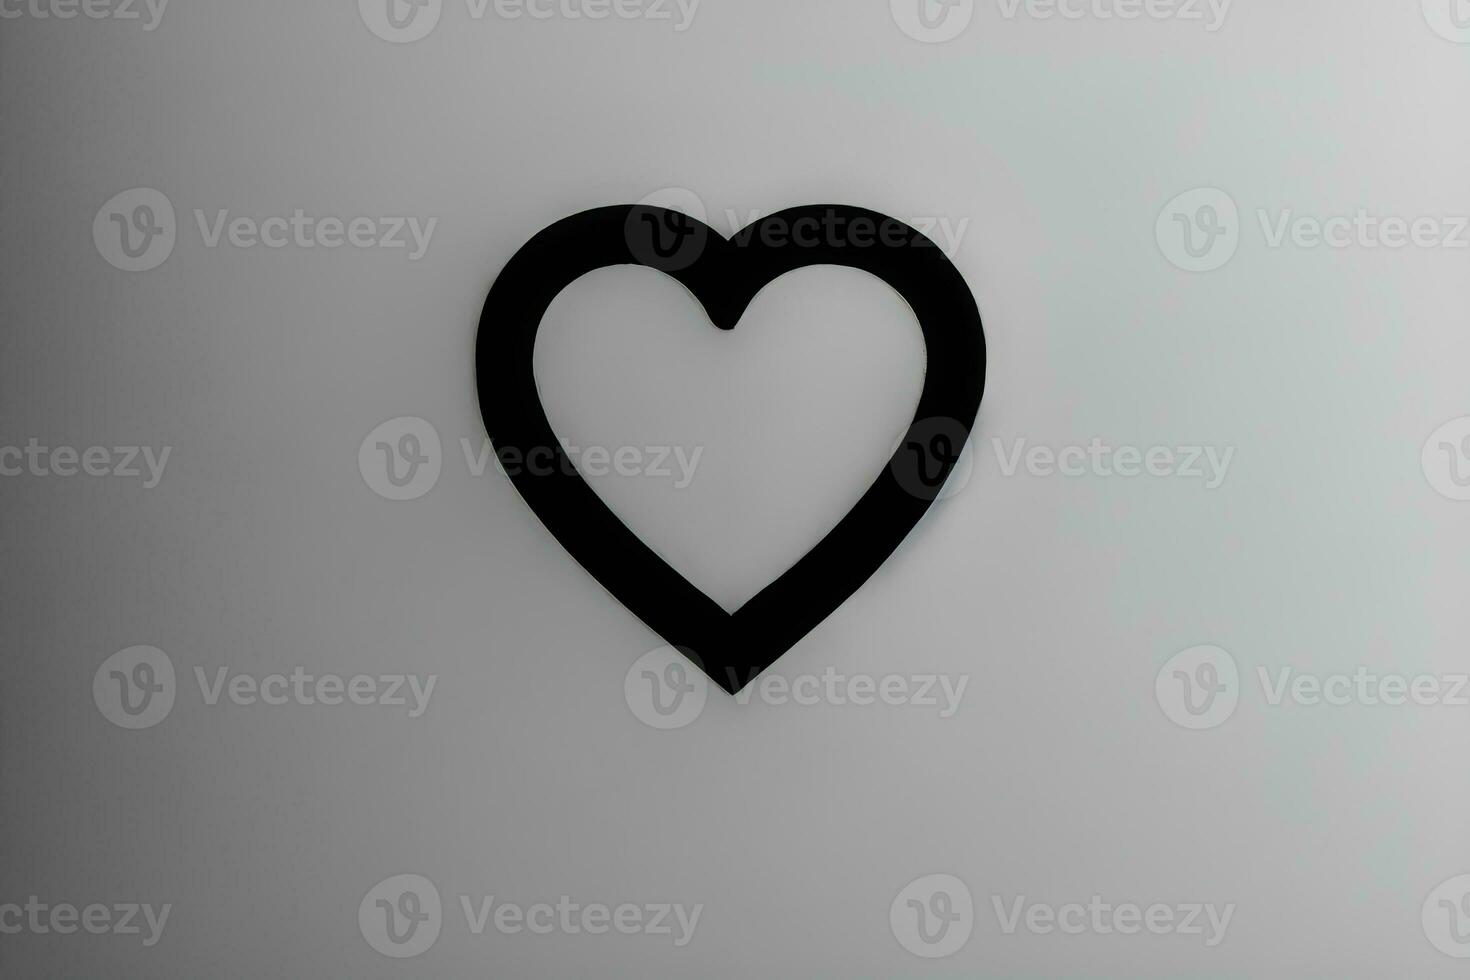 Heart-Shaped Elements for Valentine's Day Cards photo